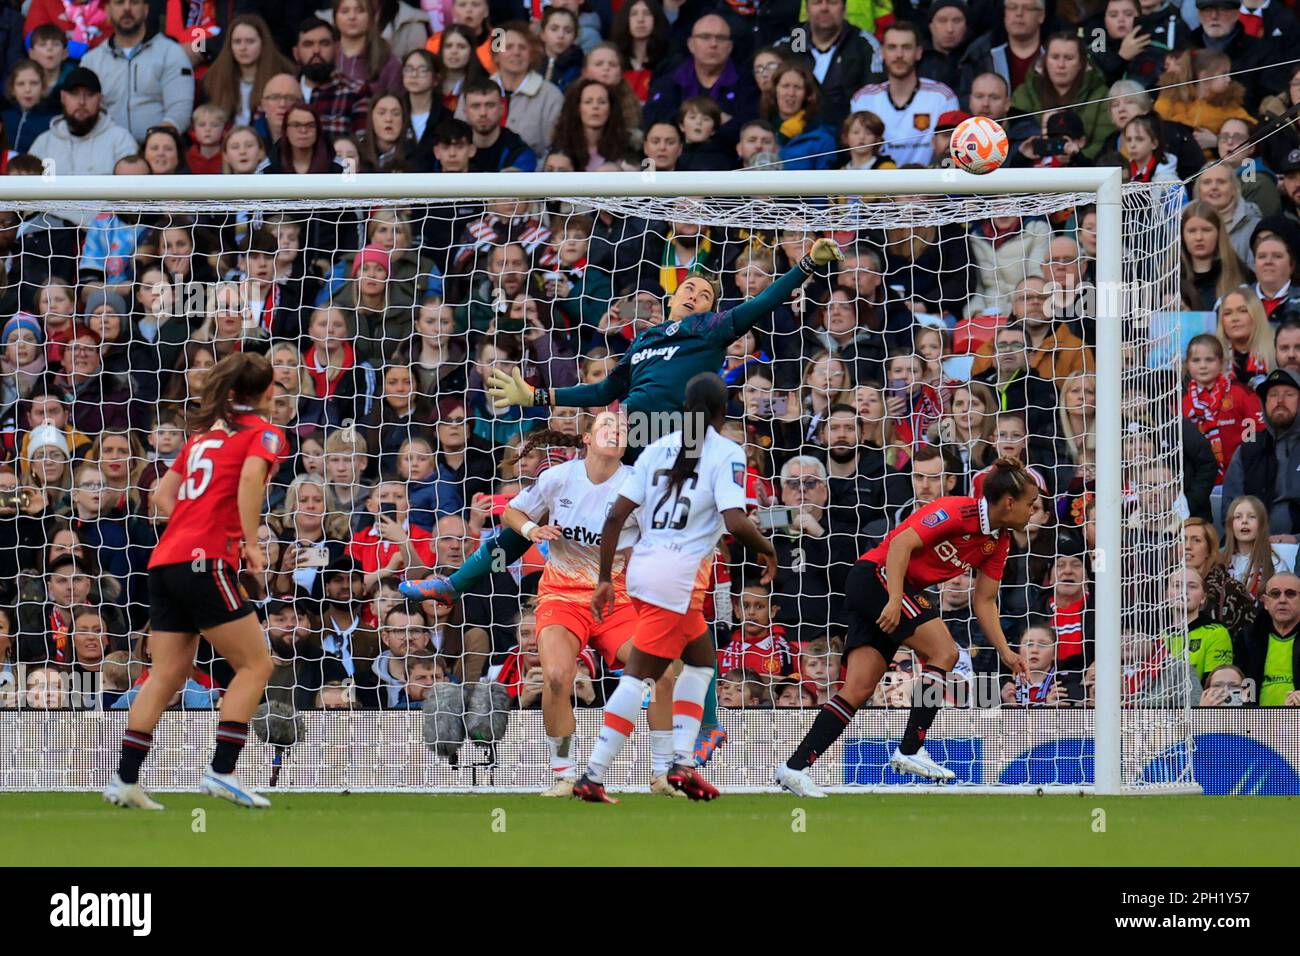 Mackenzie Arnold #1 of West Ham United makes a save during the FA Women's Super League match Manchester United Women vs West Ham United Women at Old Trafford, Manchester, United Kingdom, 25th March 2023  (Photo by Conor Molloy/News Images) Stock Photo